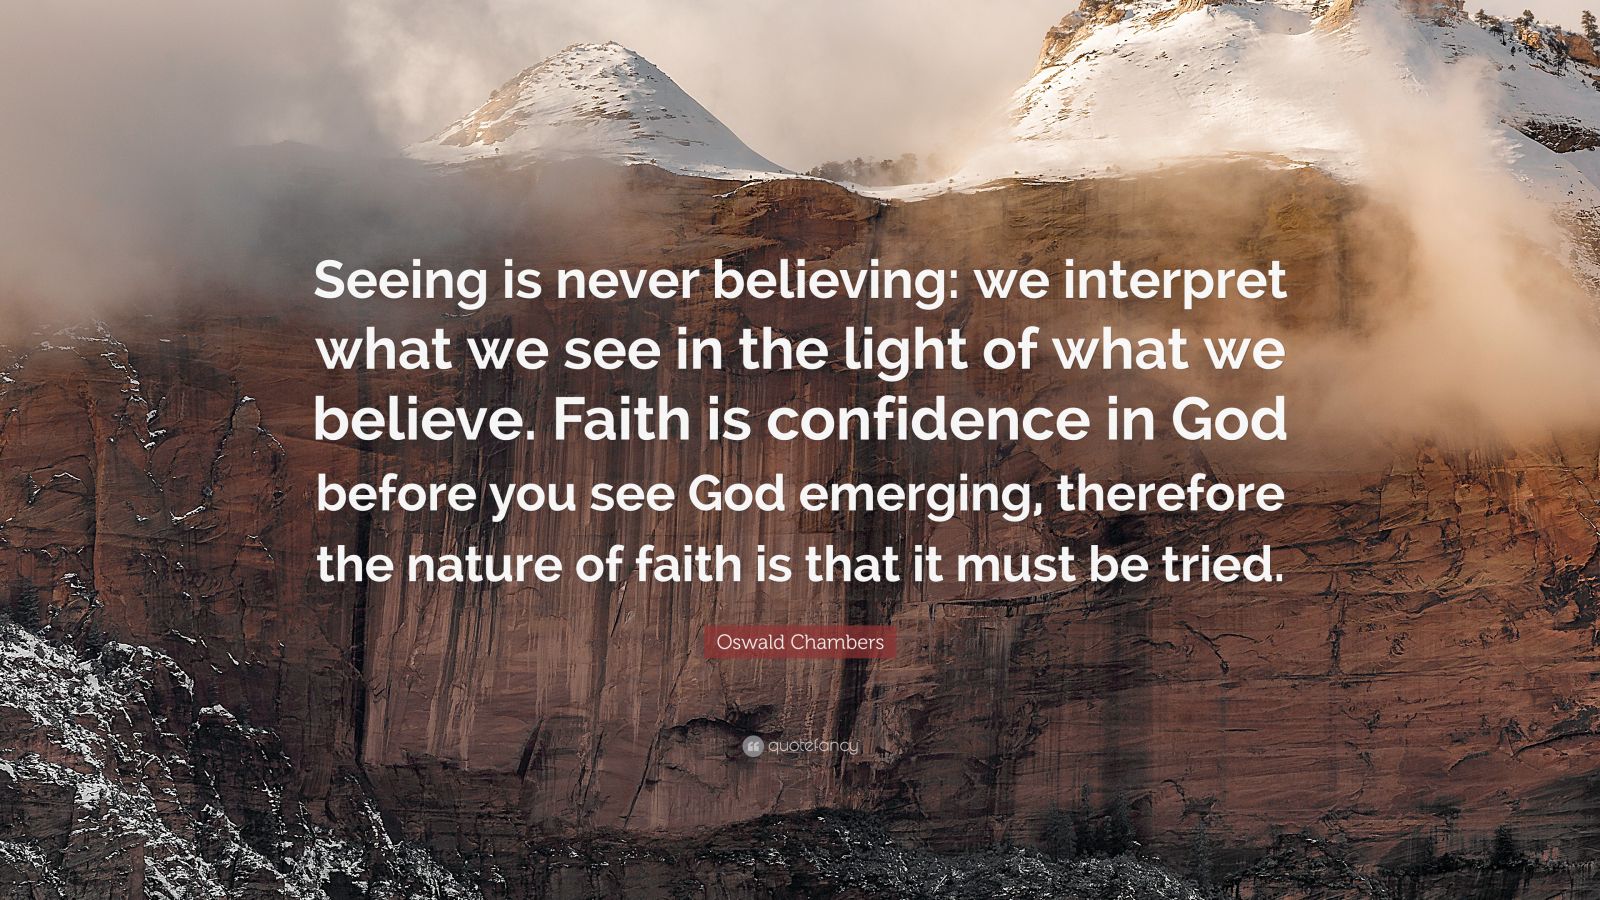 2090334 Oswald Chambers Quote Seeing is never believing we interpret what